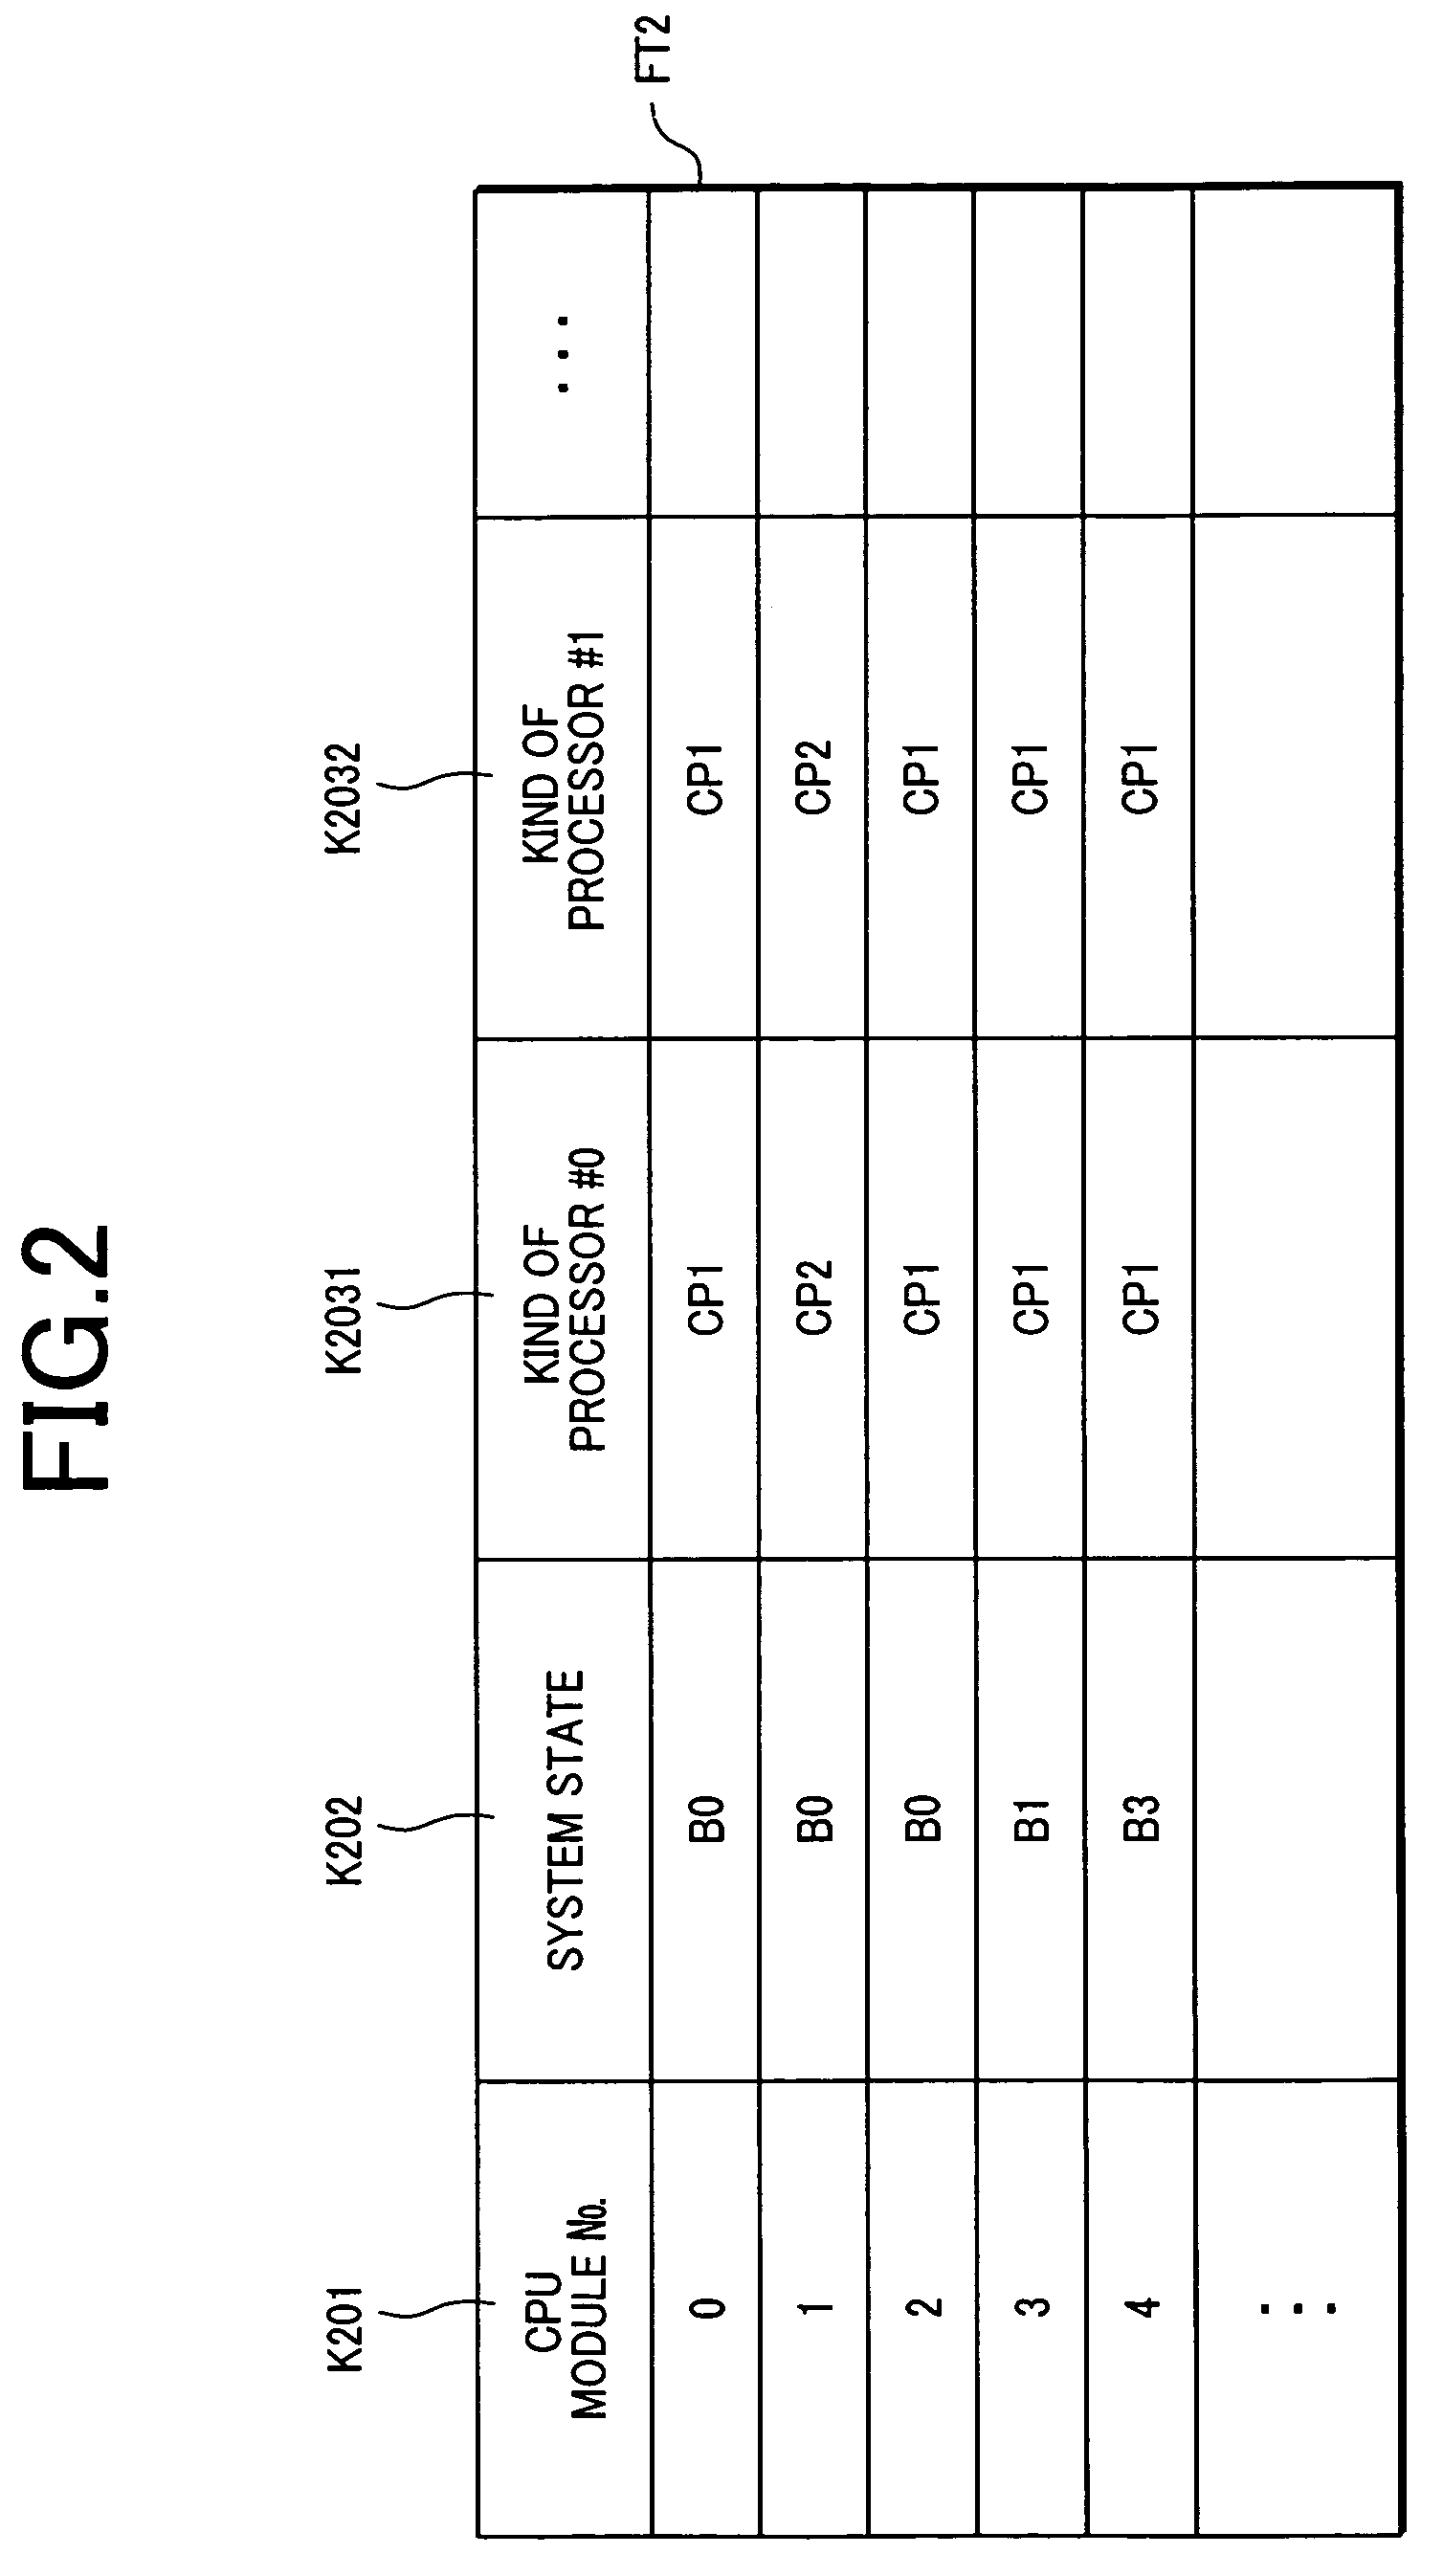 Multiple computer equipment and management method for determining number of AC-DC power modules to be operated by calculating power consumption based upon system information